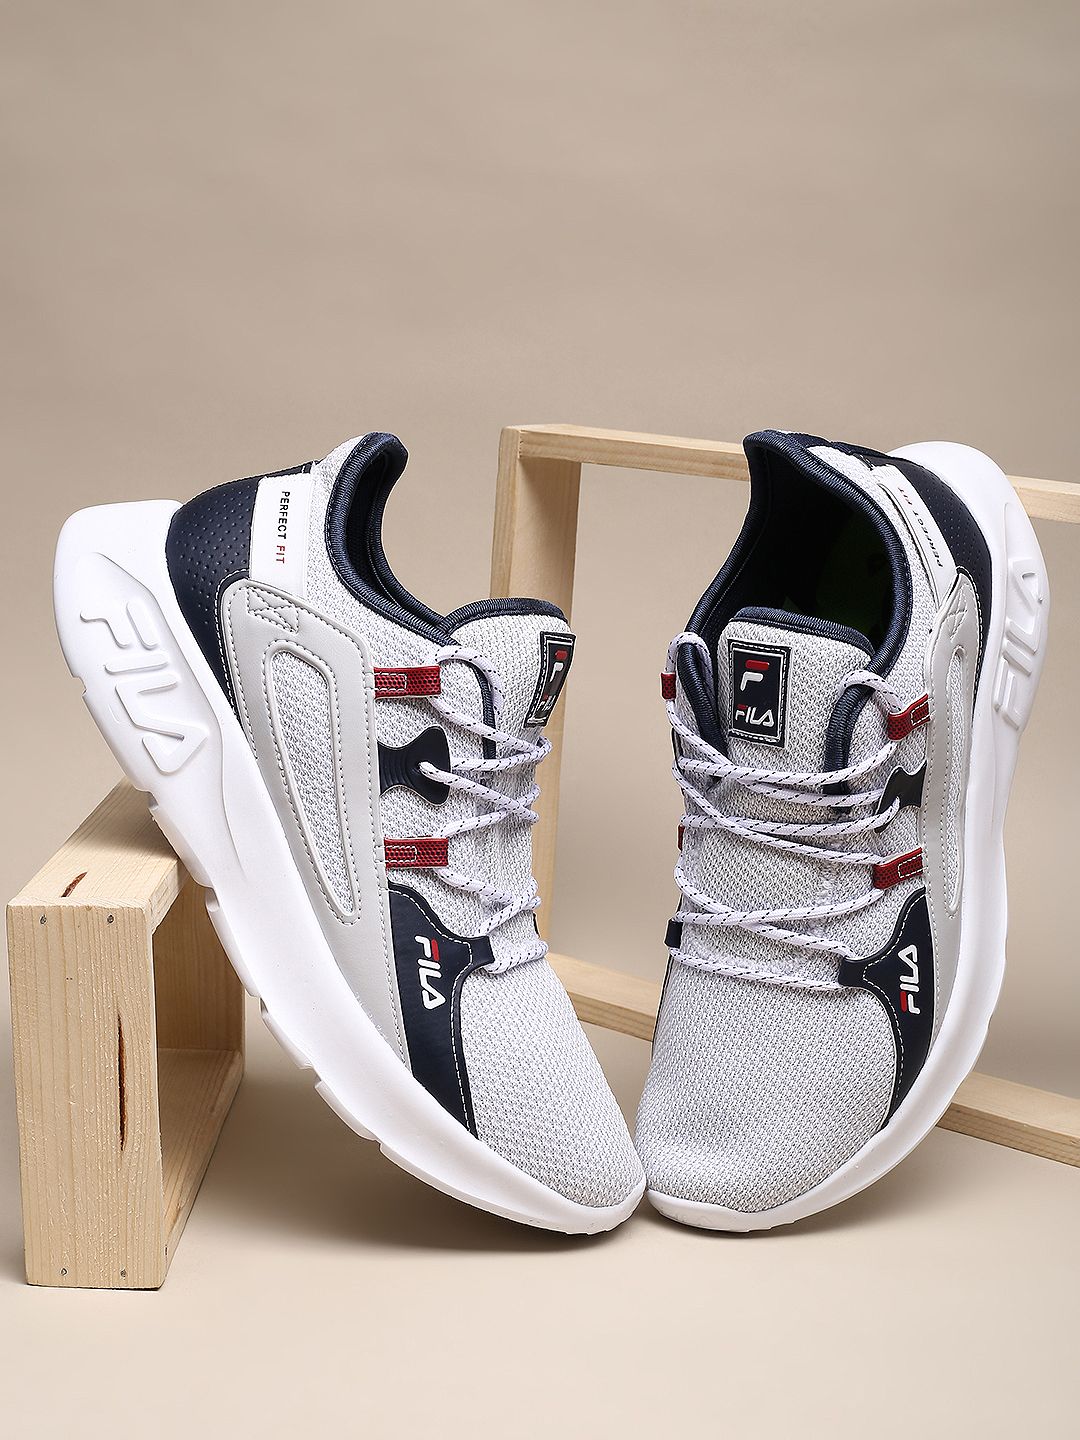 Shoes men Sneakers Male casual Mens Shoes tenis Luxury shoes Trainer R –  Aviationkart